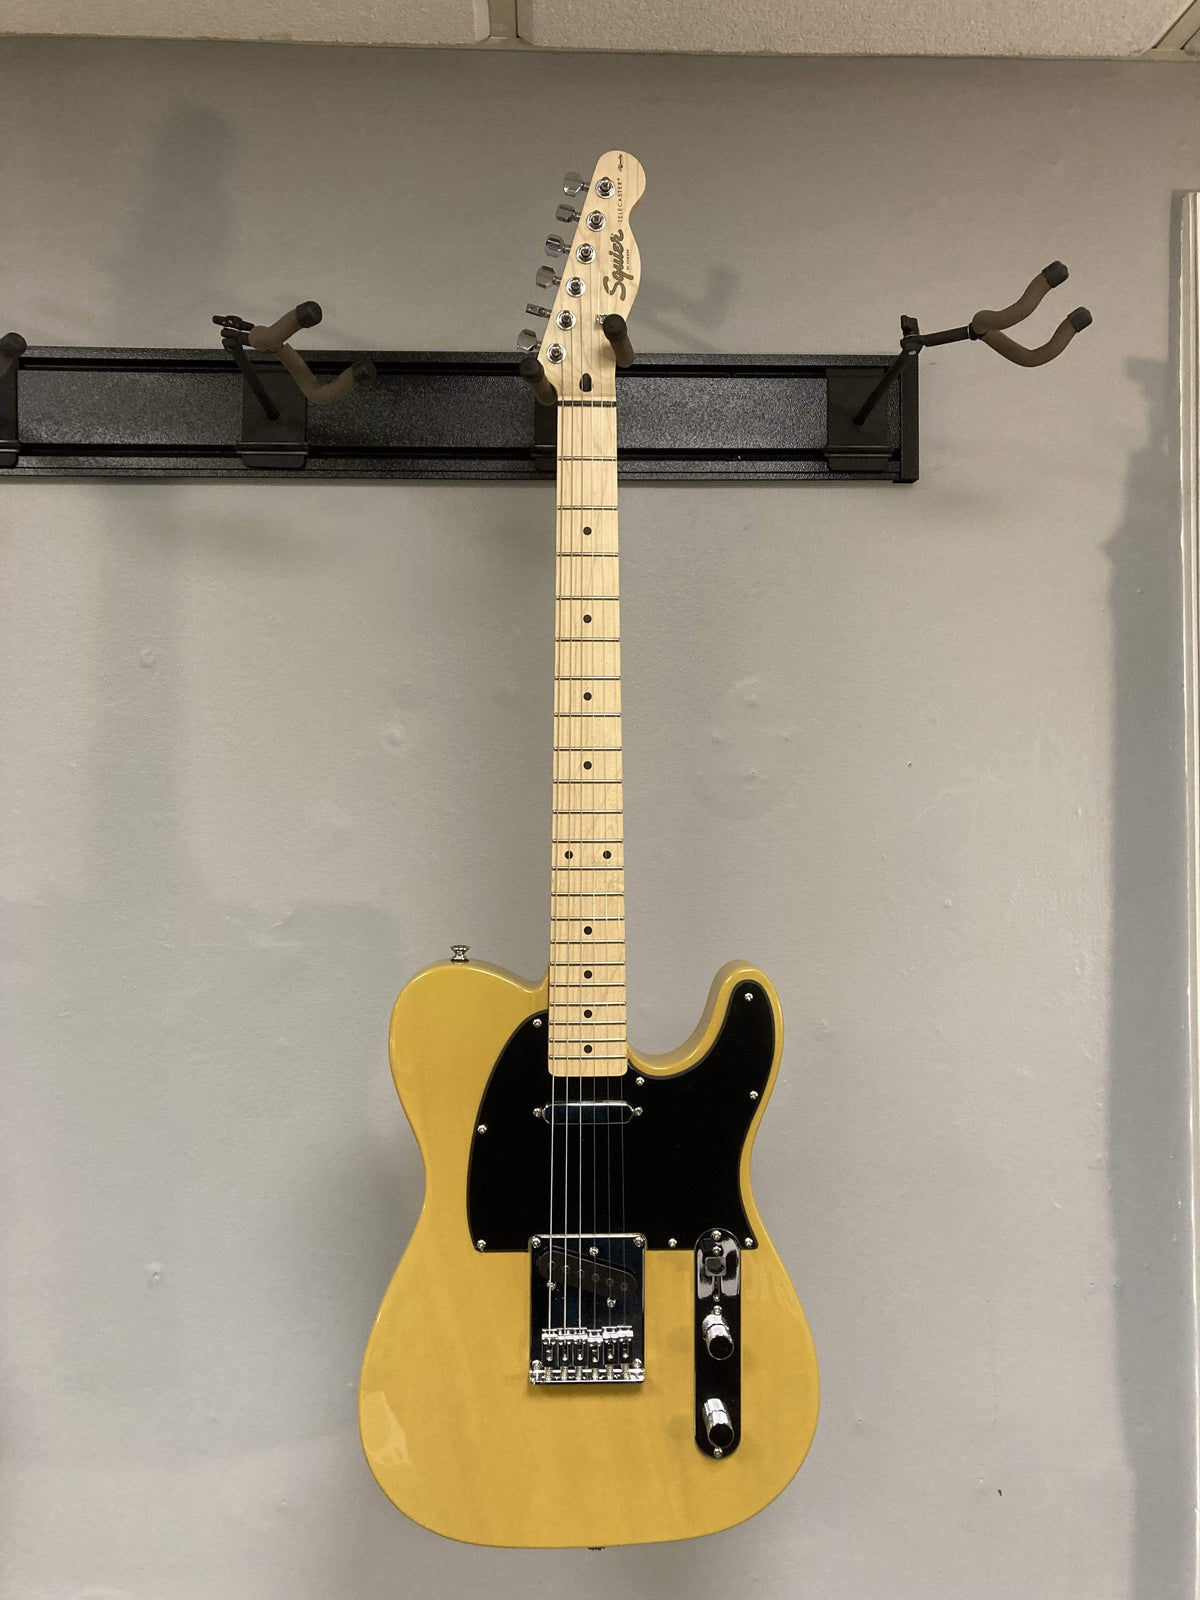 Squier Affinity Telecaster BSB Guitars on Main